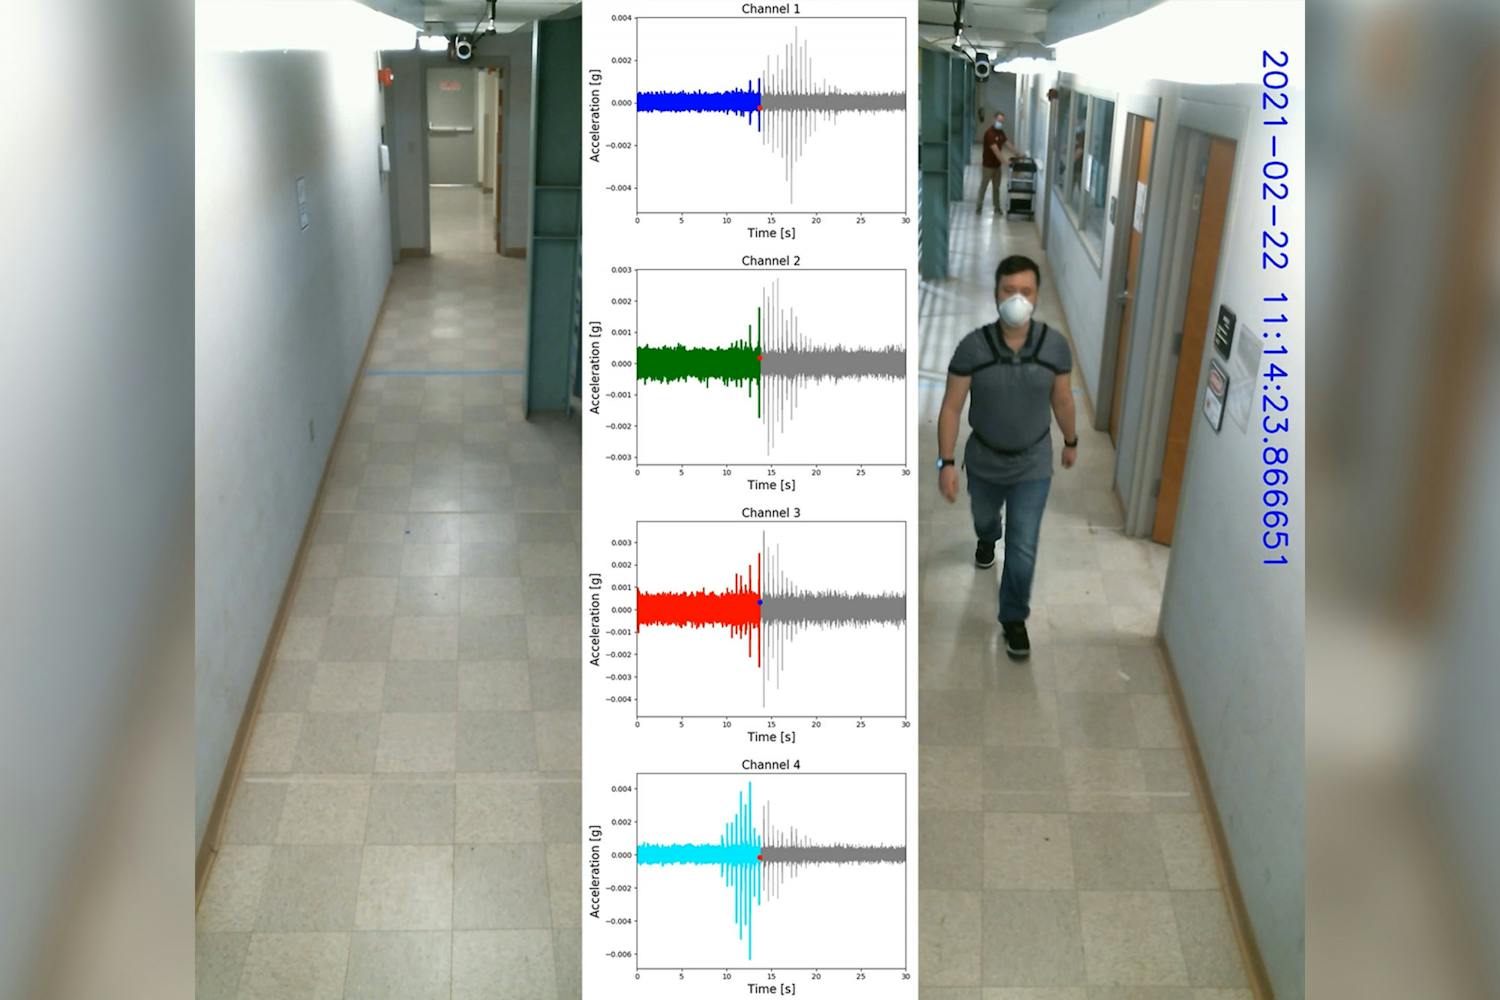 Ph.D. students Jean Franco (walking) and Garrett Hainline (background) testing floor sensors in the College of Engineering and Computing lab, with graphs illustrating the vibrations of each tester's walking patterns. The project will help clinicians care for elderly patients.&nbsp;